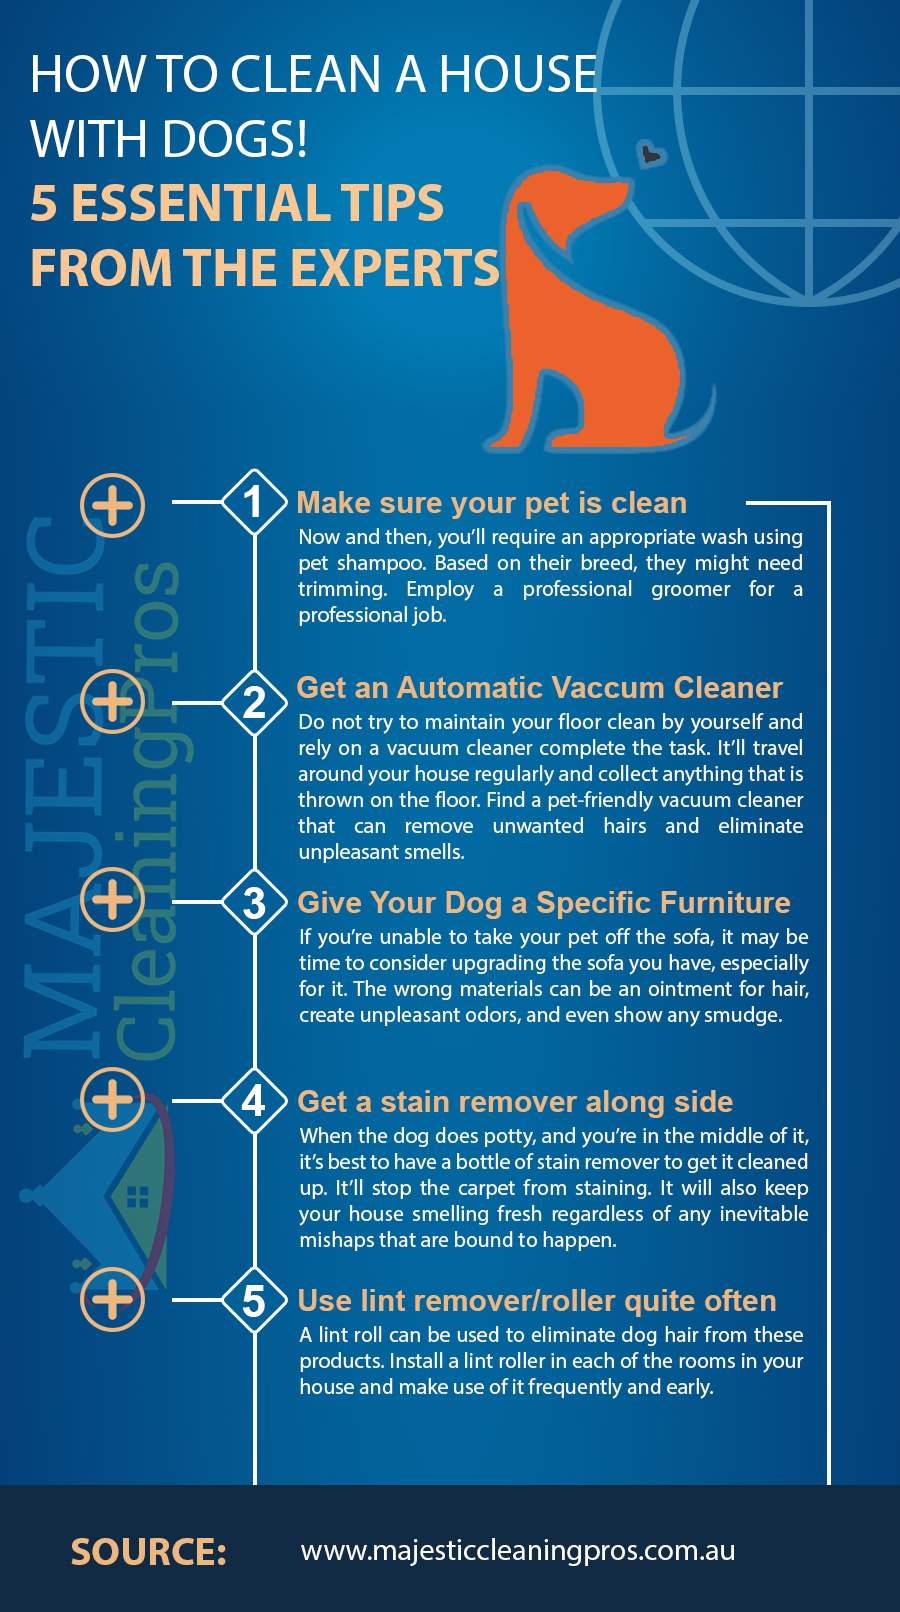 How-to-Clean-a-House-with-Dogs-5-Essential-Tips-from-the-Experts